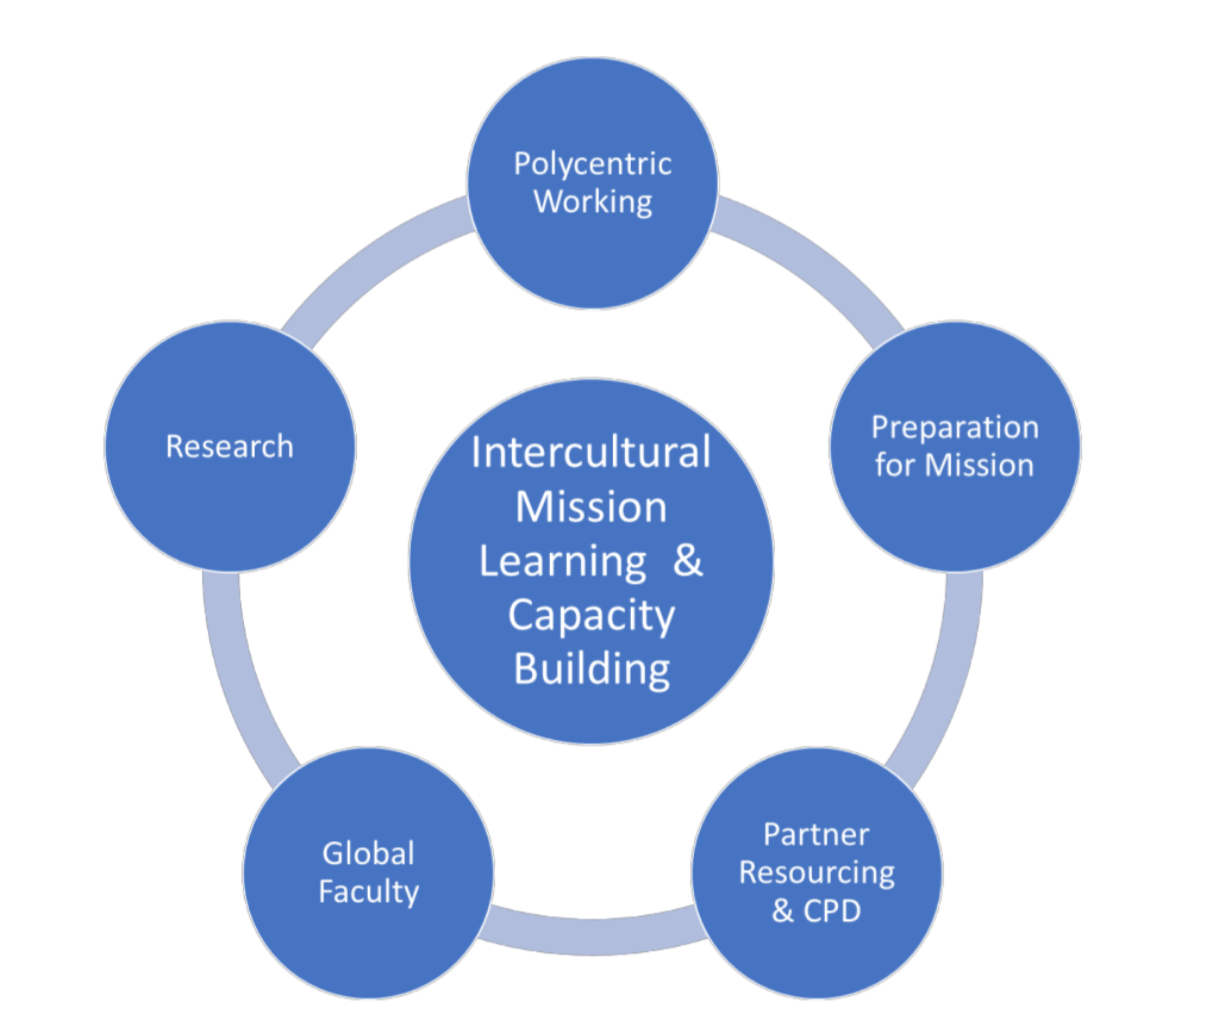 BMS World Mission: A Case Study toward Polycentric Mission Leadership